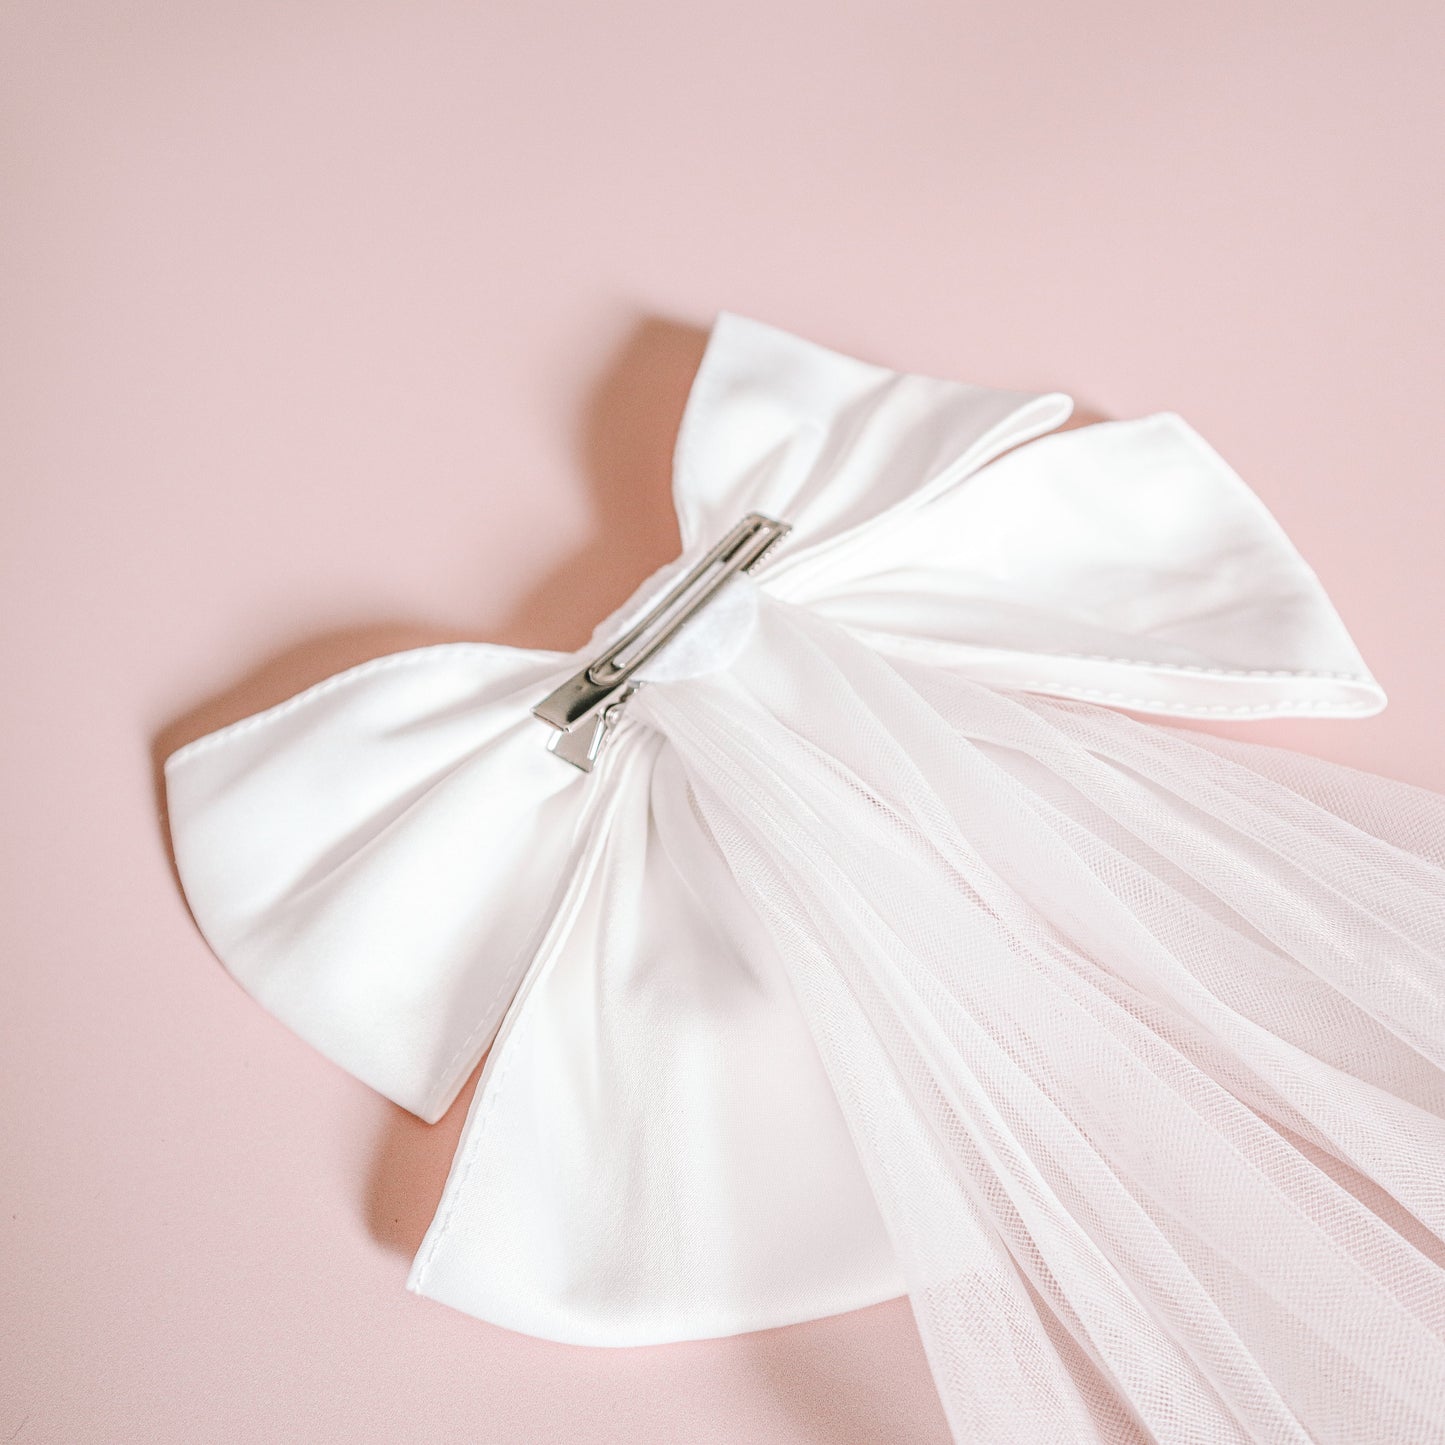 Hen Party Bow Tulle Veil - The Hen Planner